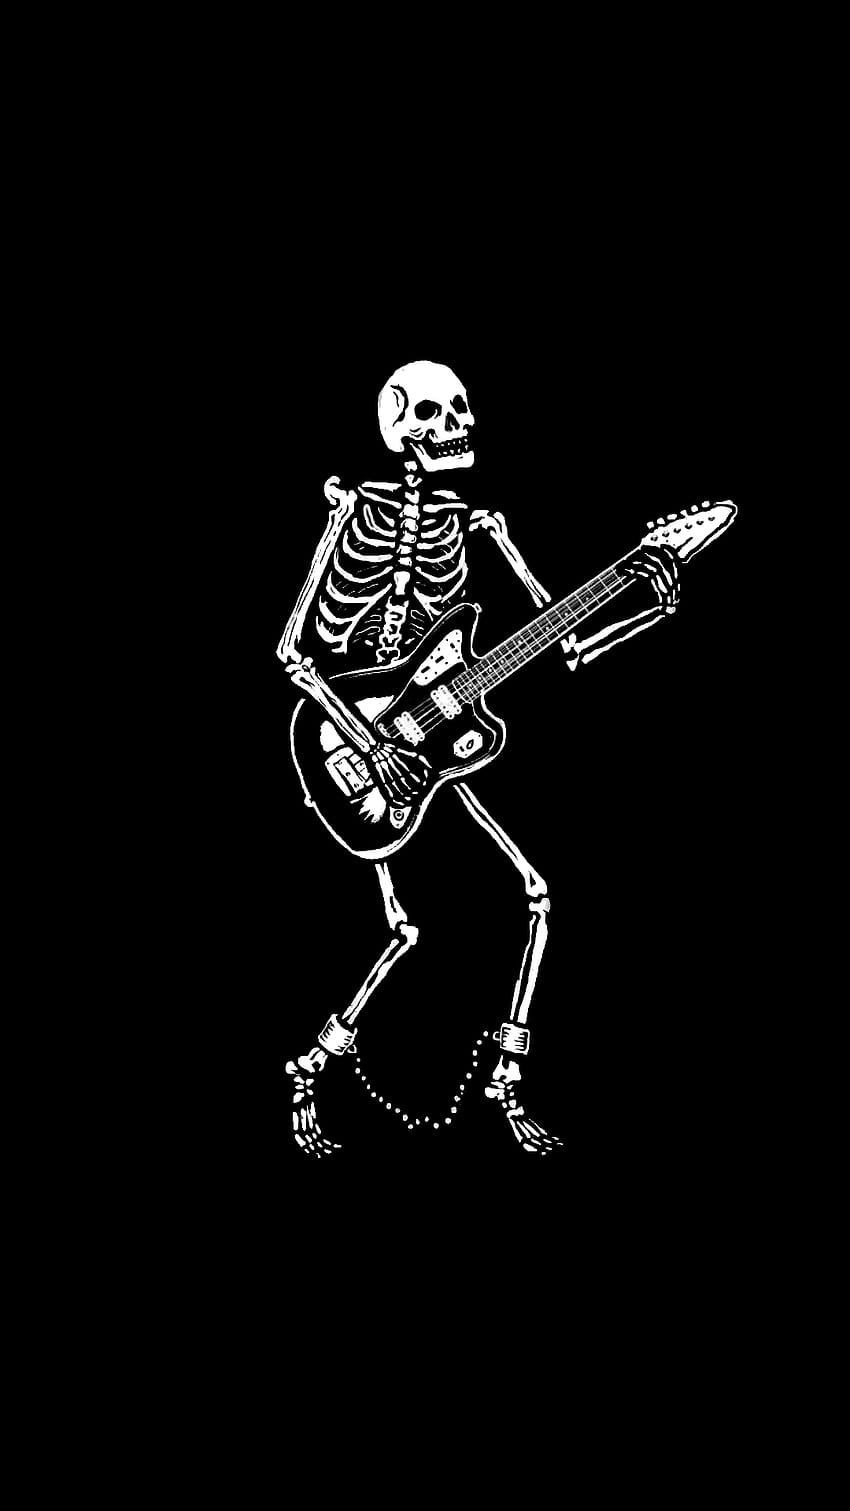 Did an AMOLED version of the skull playing guitar that someone, guitar amoled HD phone wallpaper